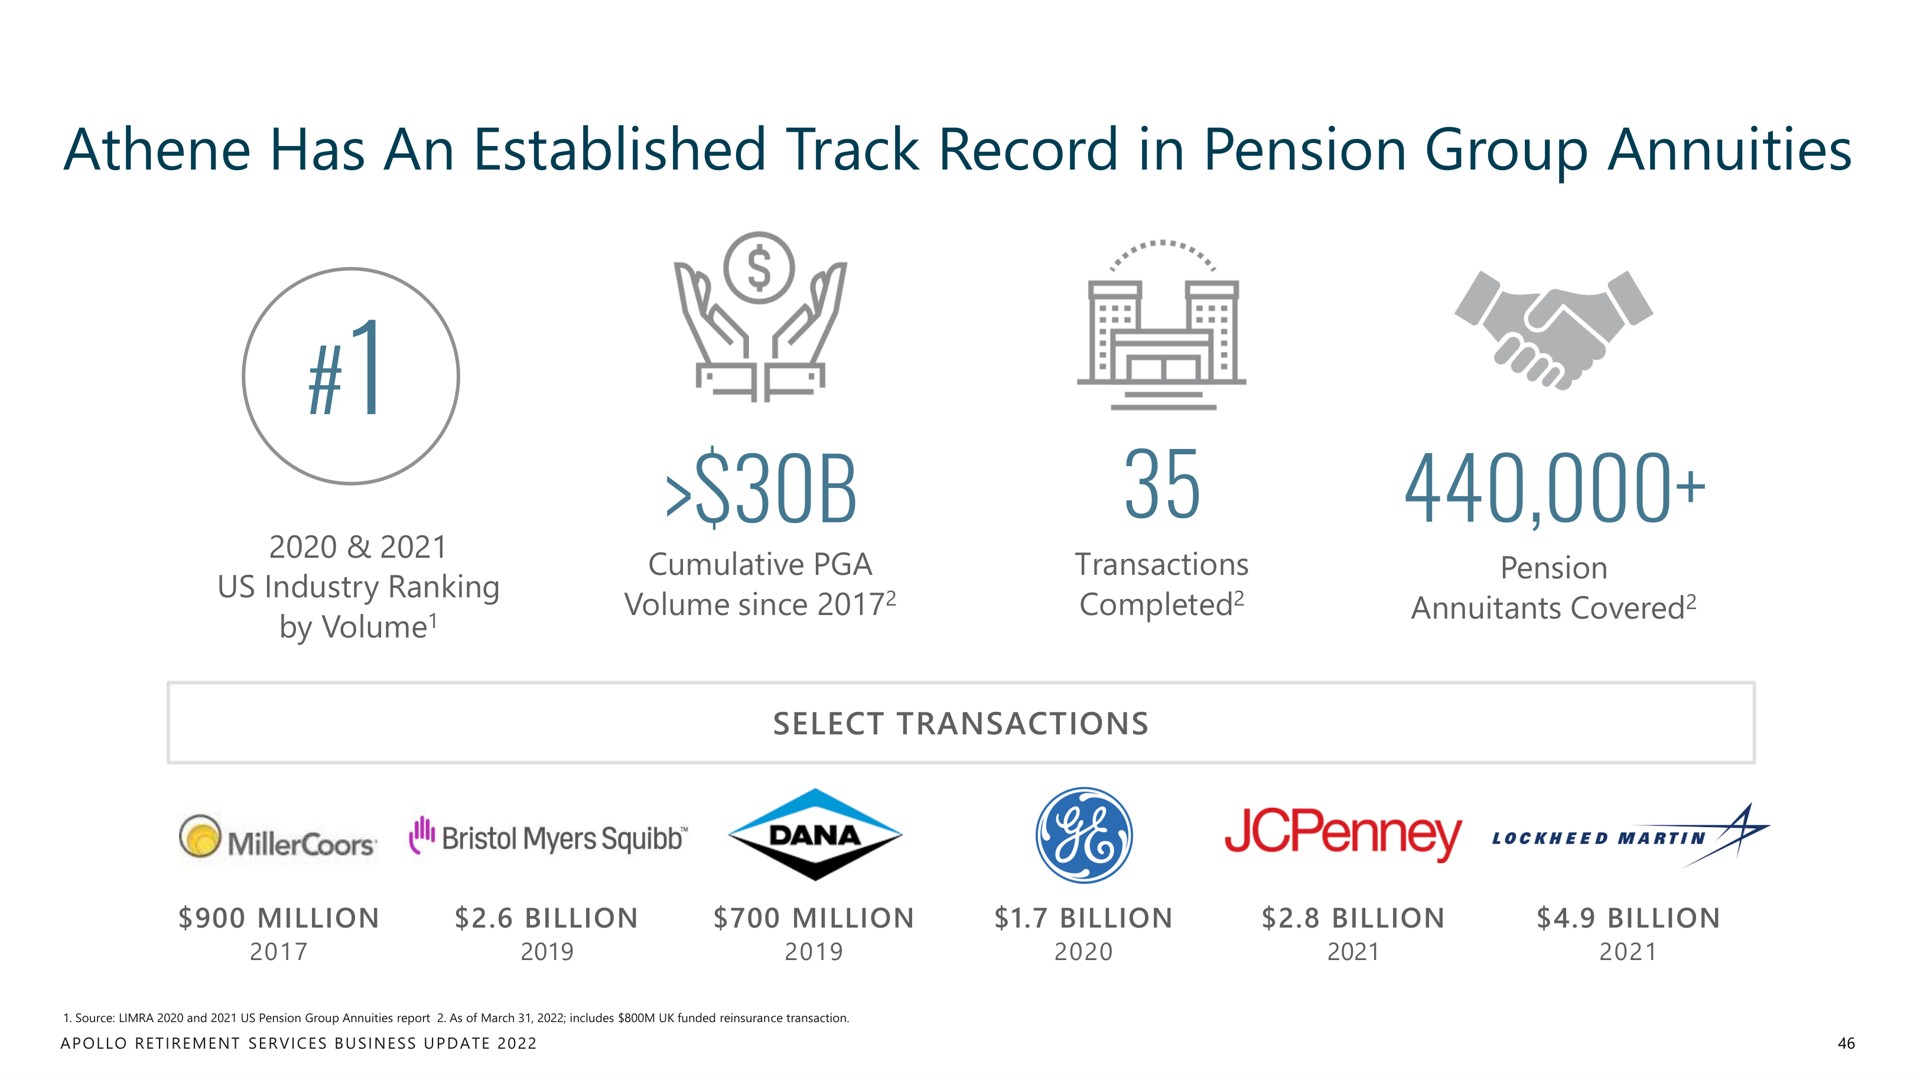 has an established track record in pension group annuities | Apollo Global Management